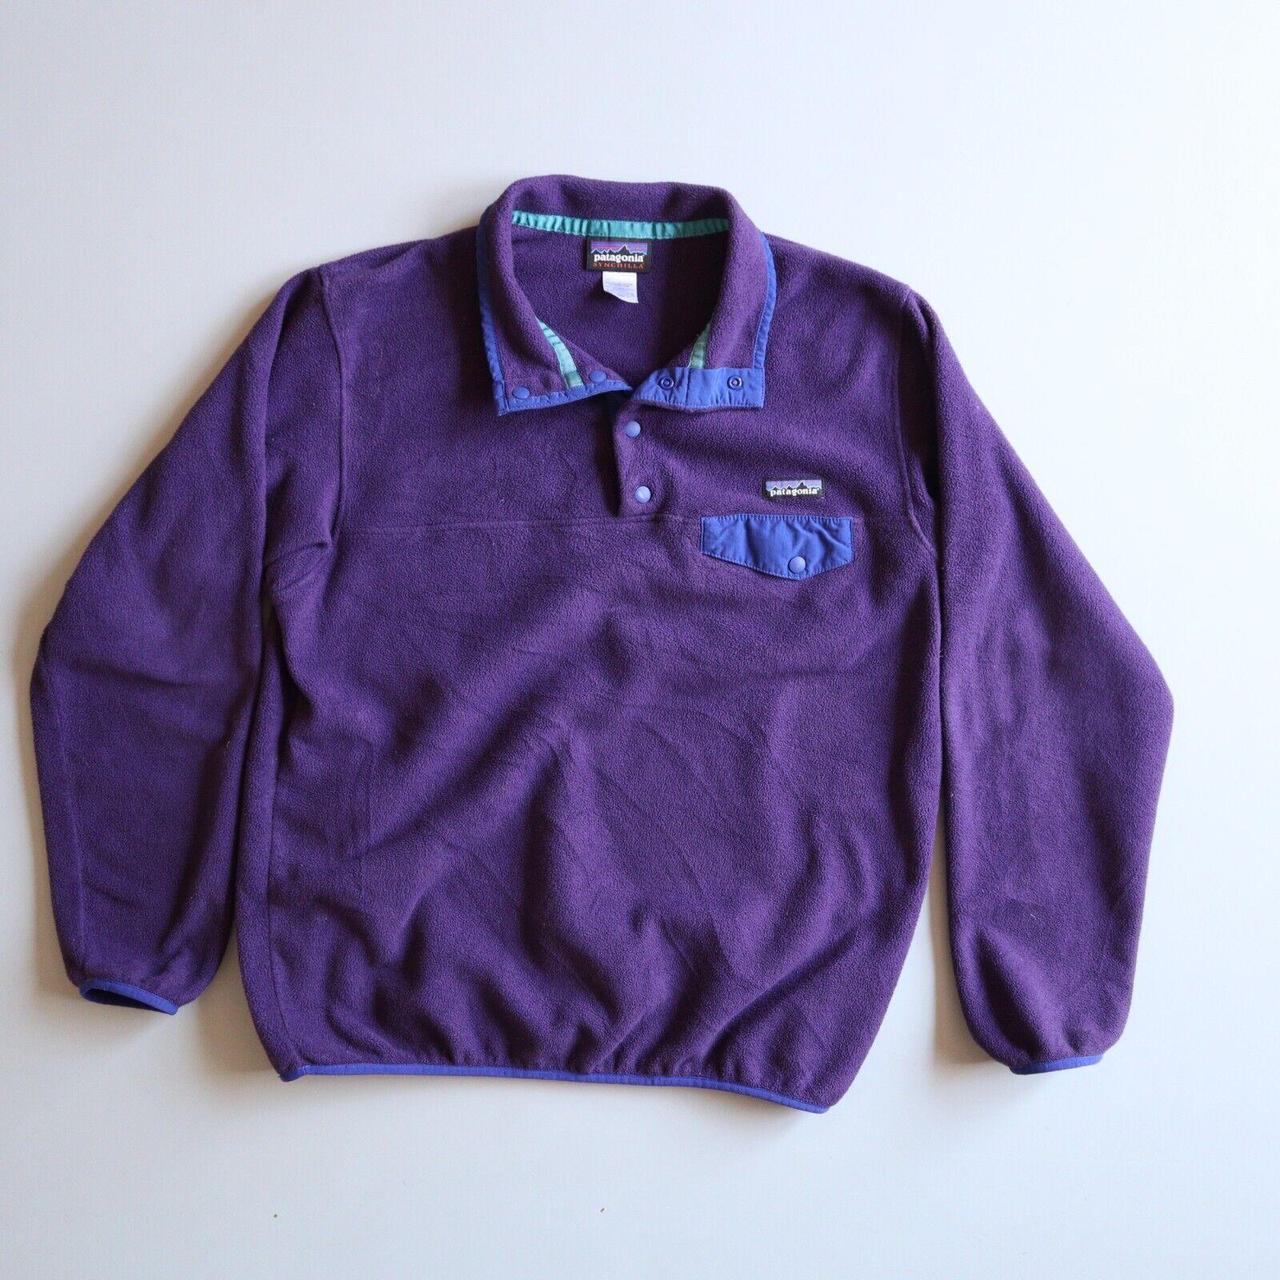 Patagonia Women's Purple and Blue Jacket